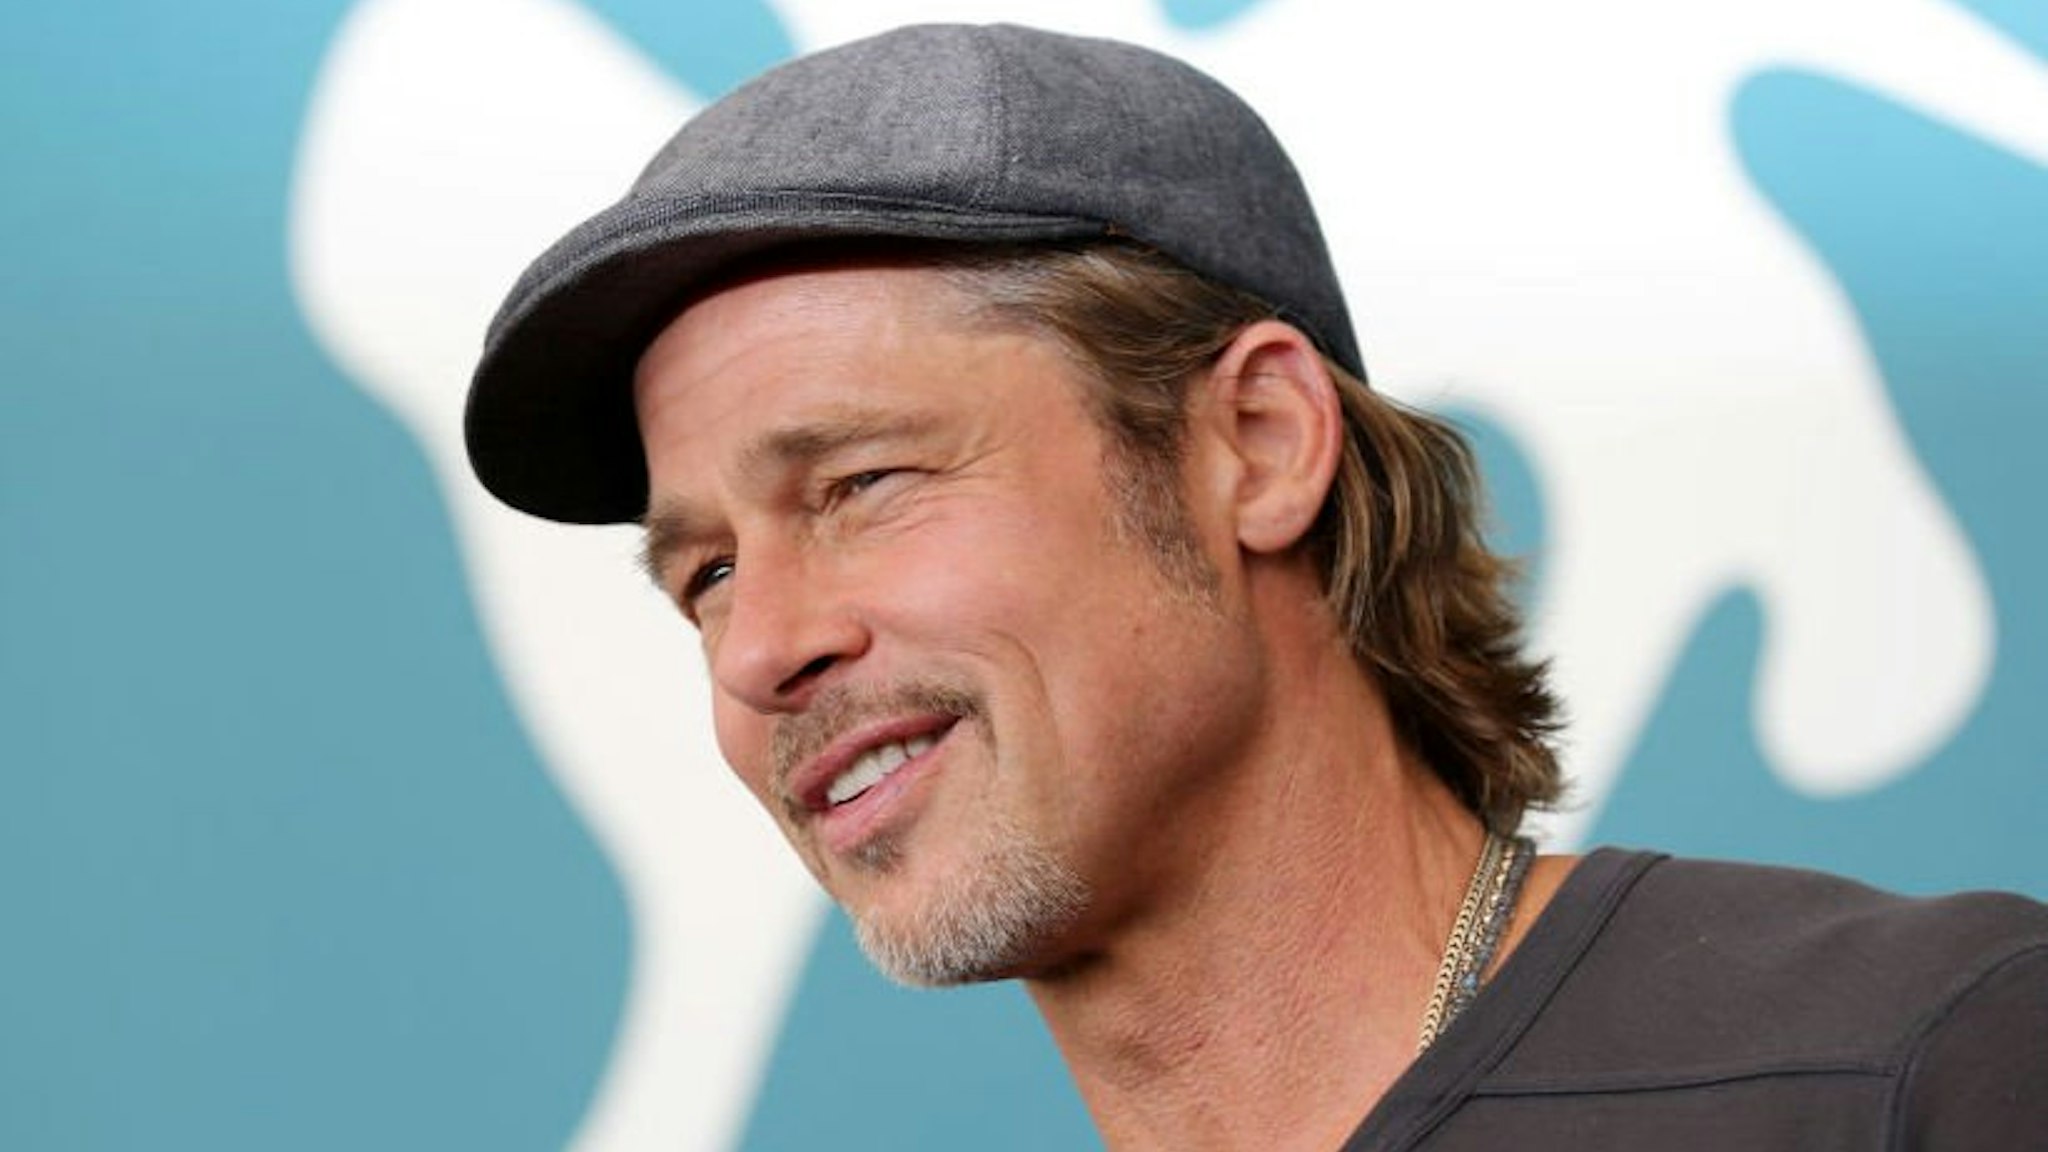 Brad Pitt attends "Ad Astra" photocall during the 76th Venice Film Festival at Sala Grande on August 29, 2019 in Venice, Italy.